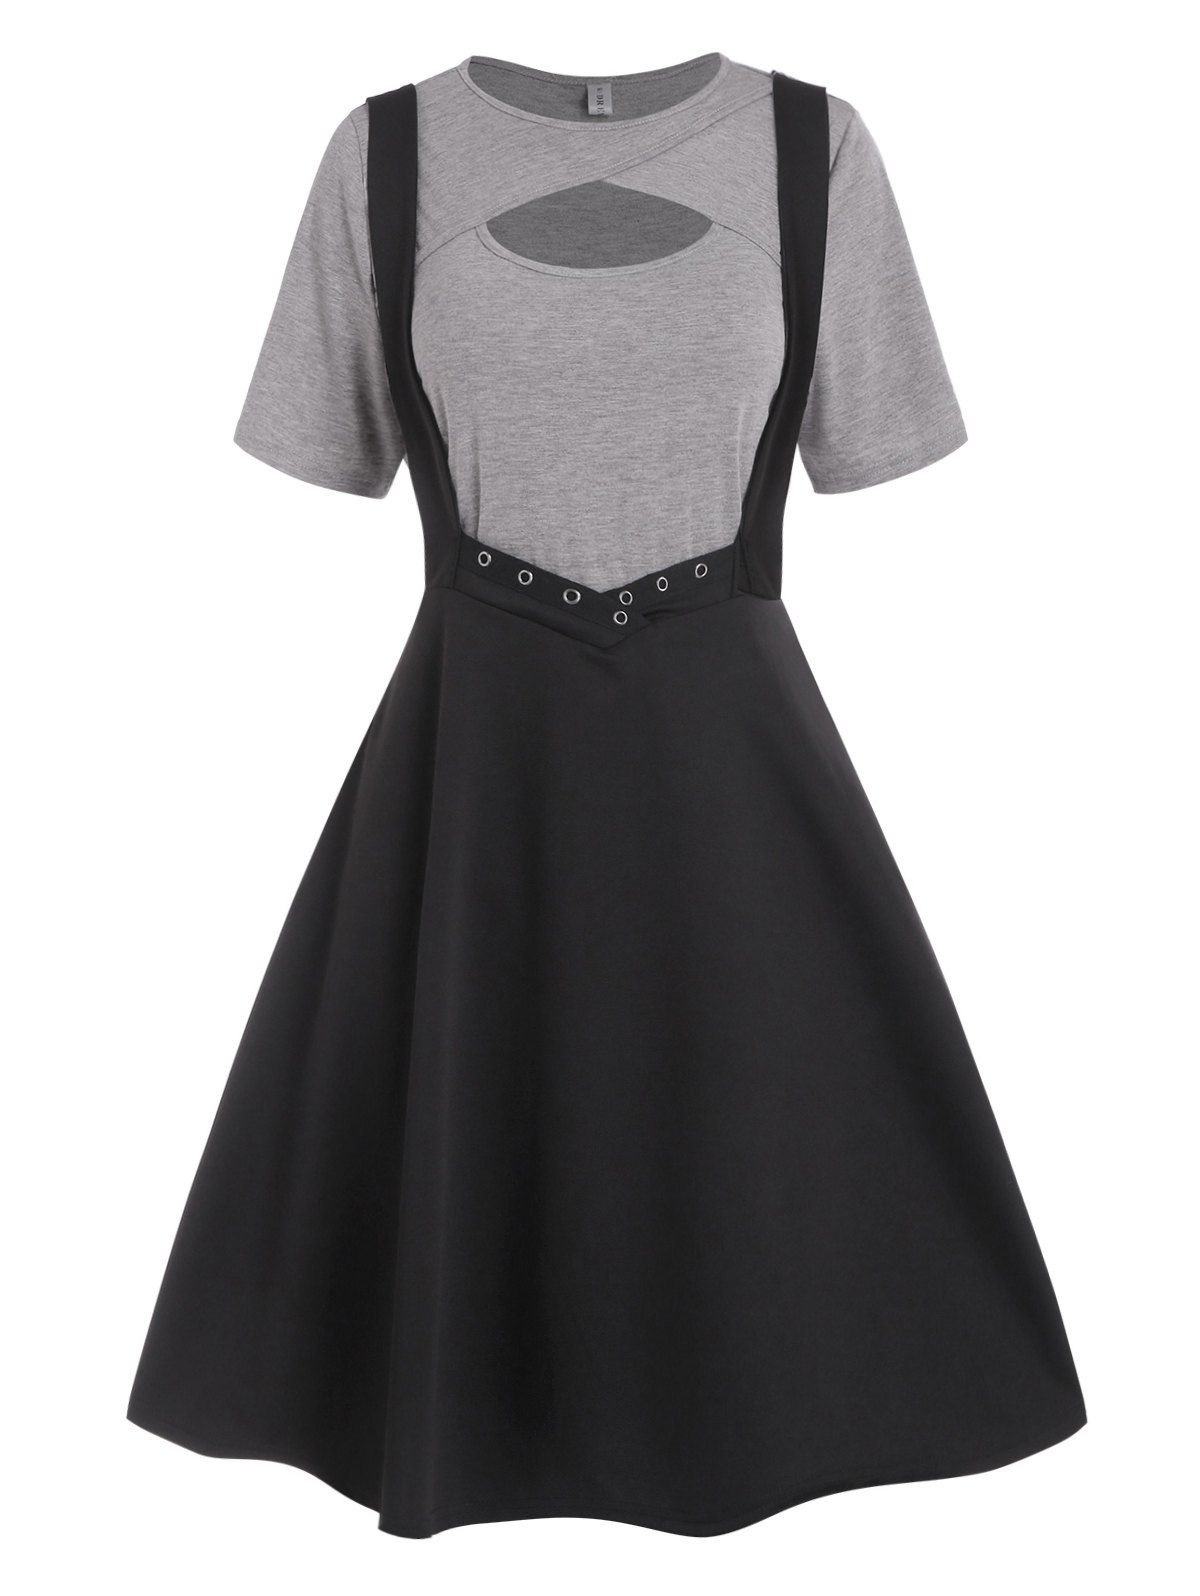 Cut Out Heathered Short Sleeve T Shirt And Grommet Crossover Suspender Skirt Two Piece Set 